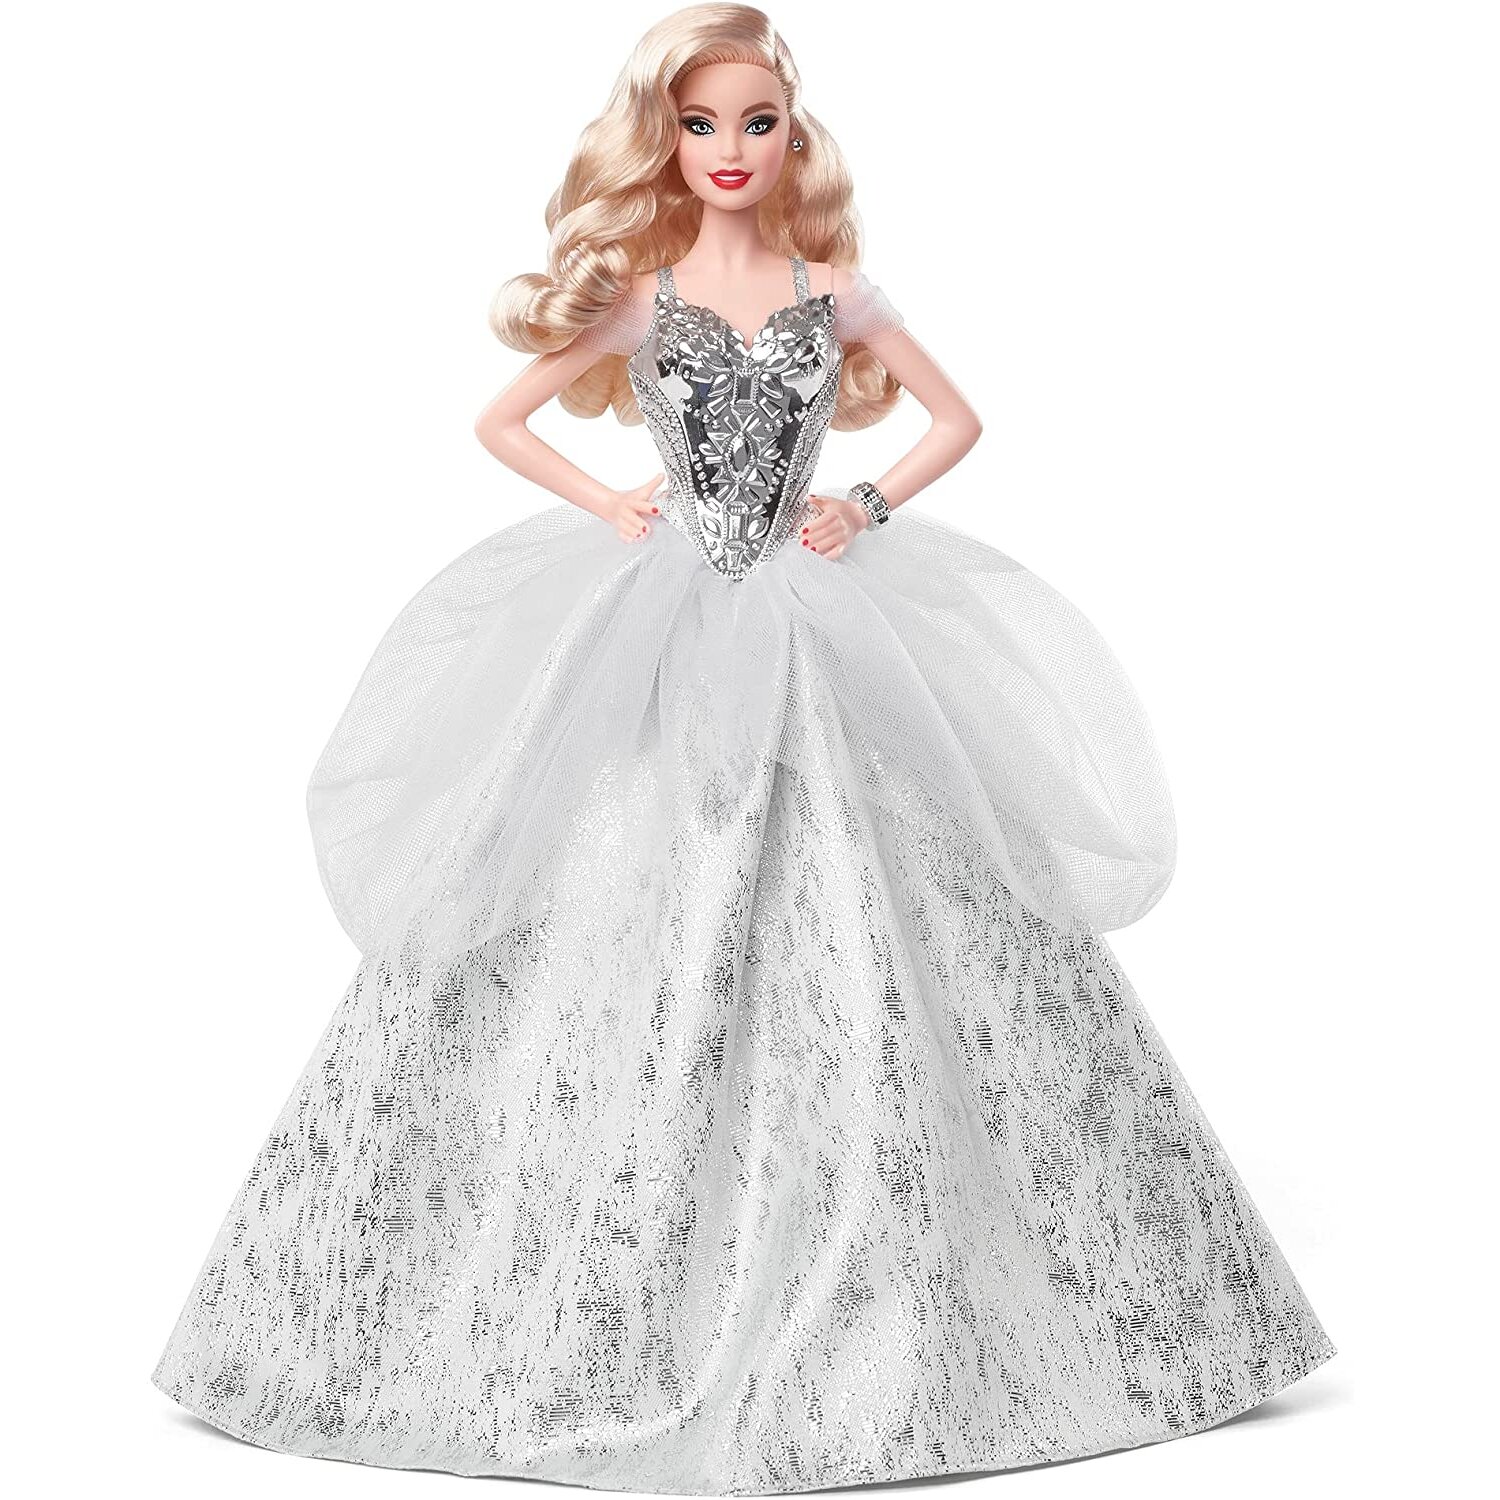 Barbie Signature Fiesta Collectible Toy Doll with Blonde Waves and Ball Gown (Mattel GXL21